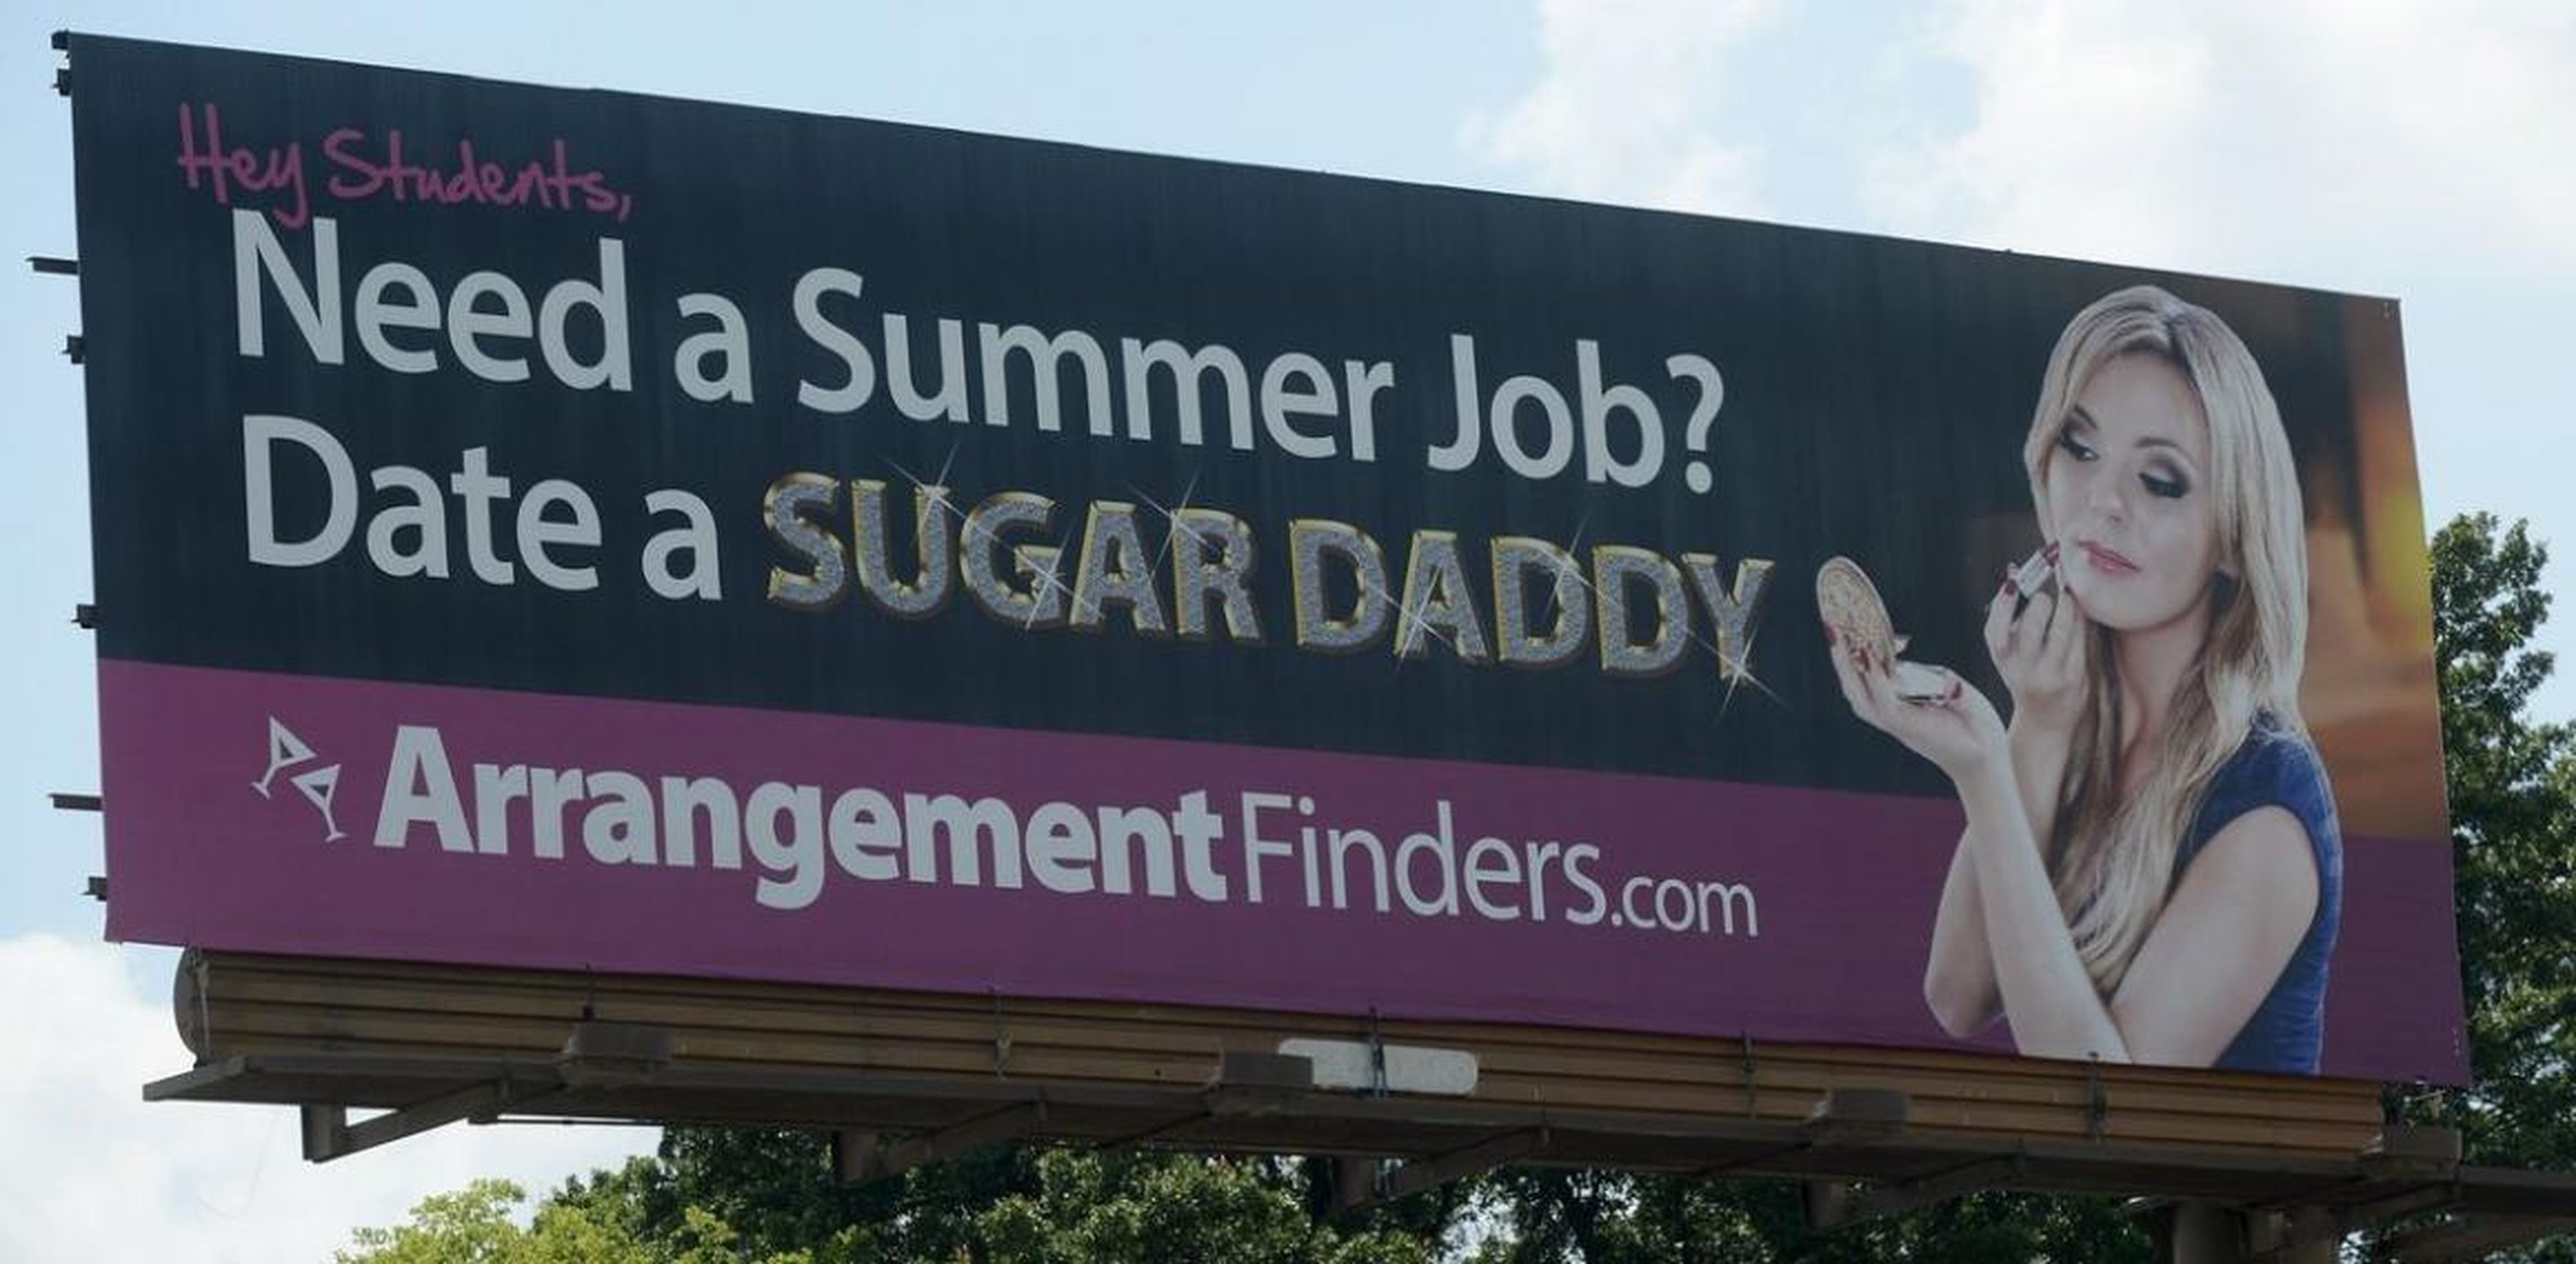 It's worth noting you should never become a sugar baby just for the money